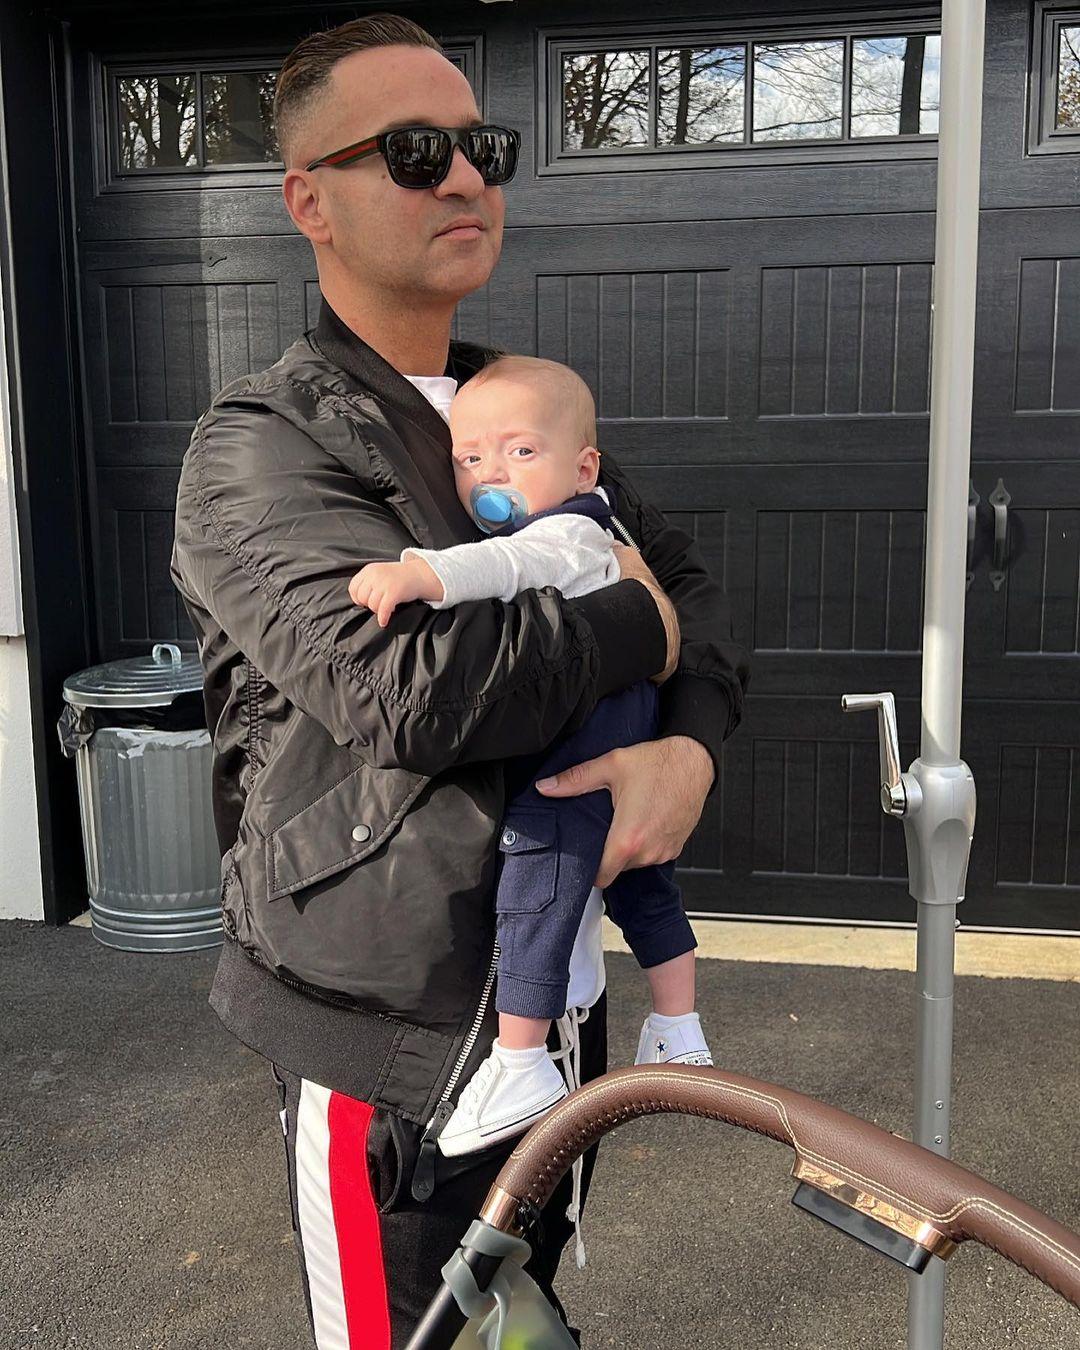 Mike ‘The Situation’ Sorrentino’s Child Looks Like Character From ‘Boss Baby!’